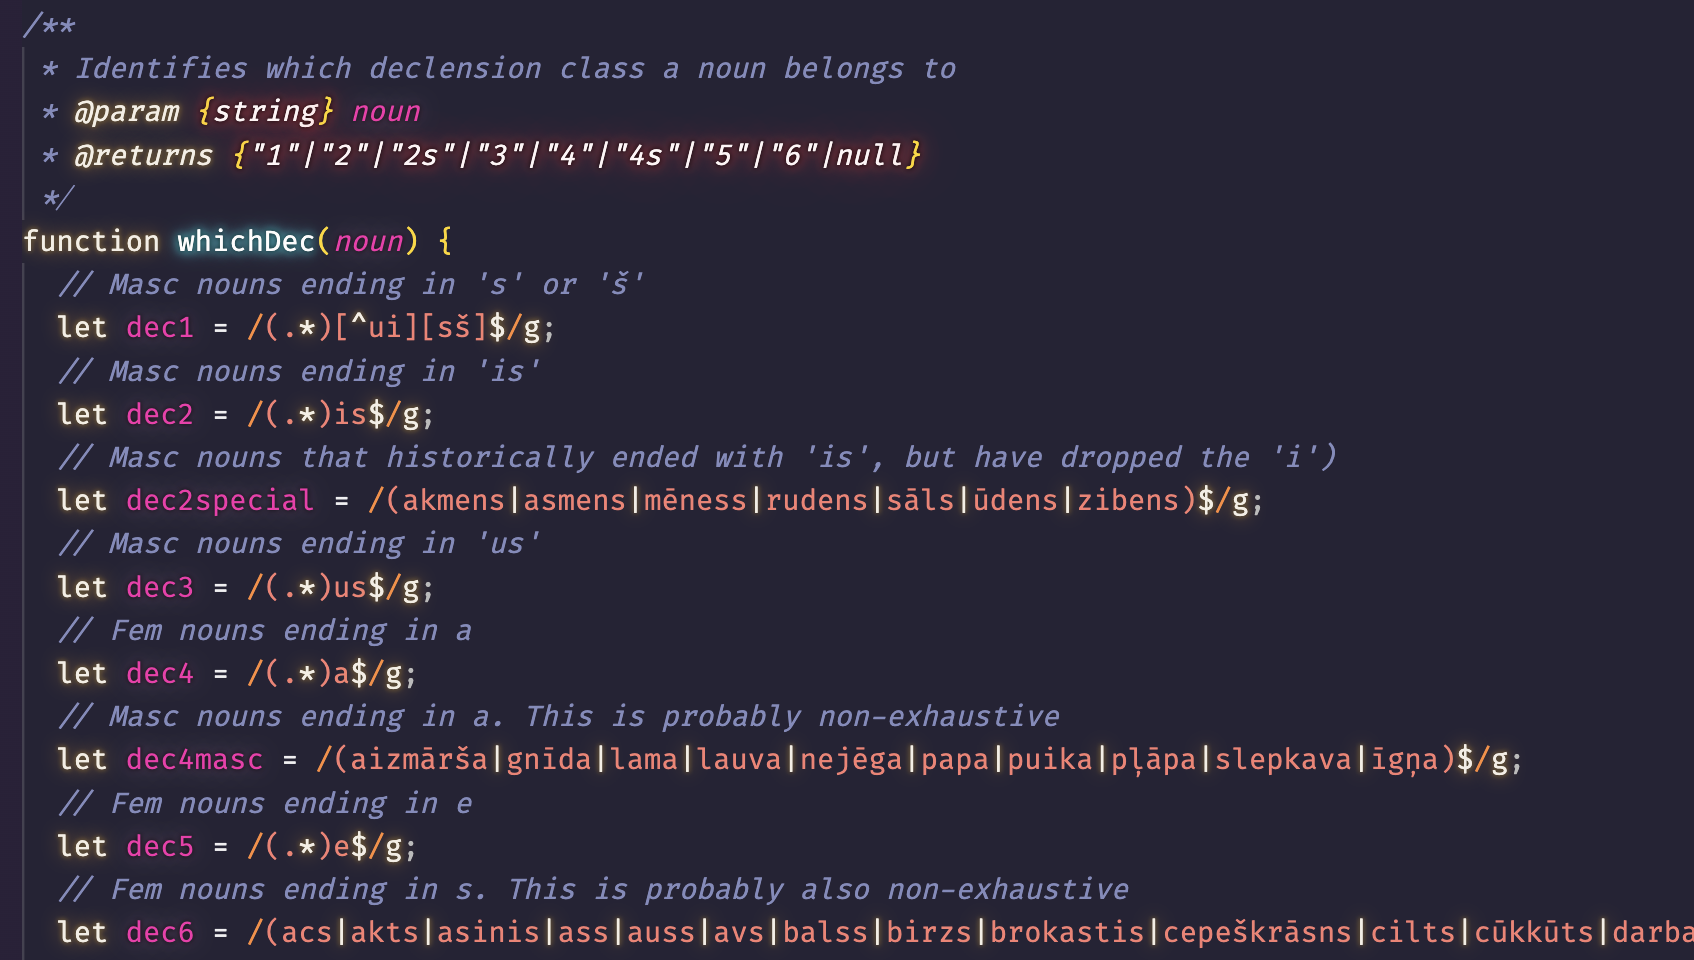 A screenshot of some of the code from my side-project, showing how I used regex to determine the noun class